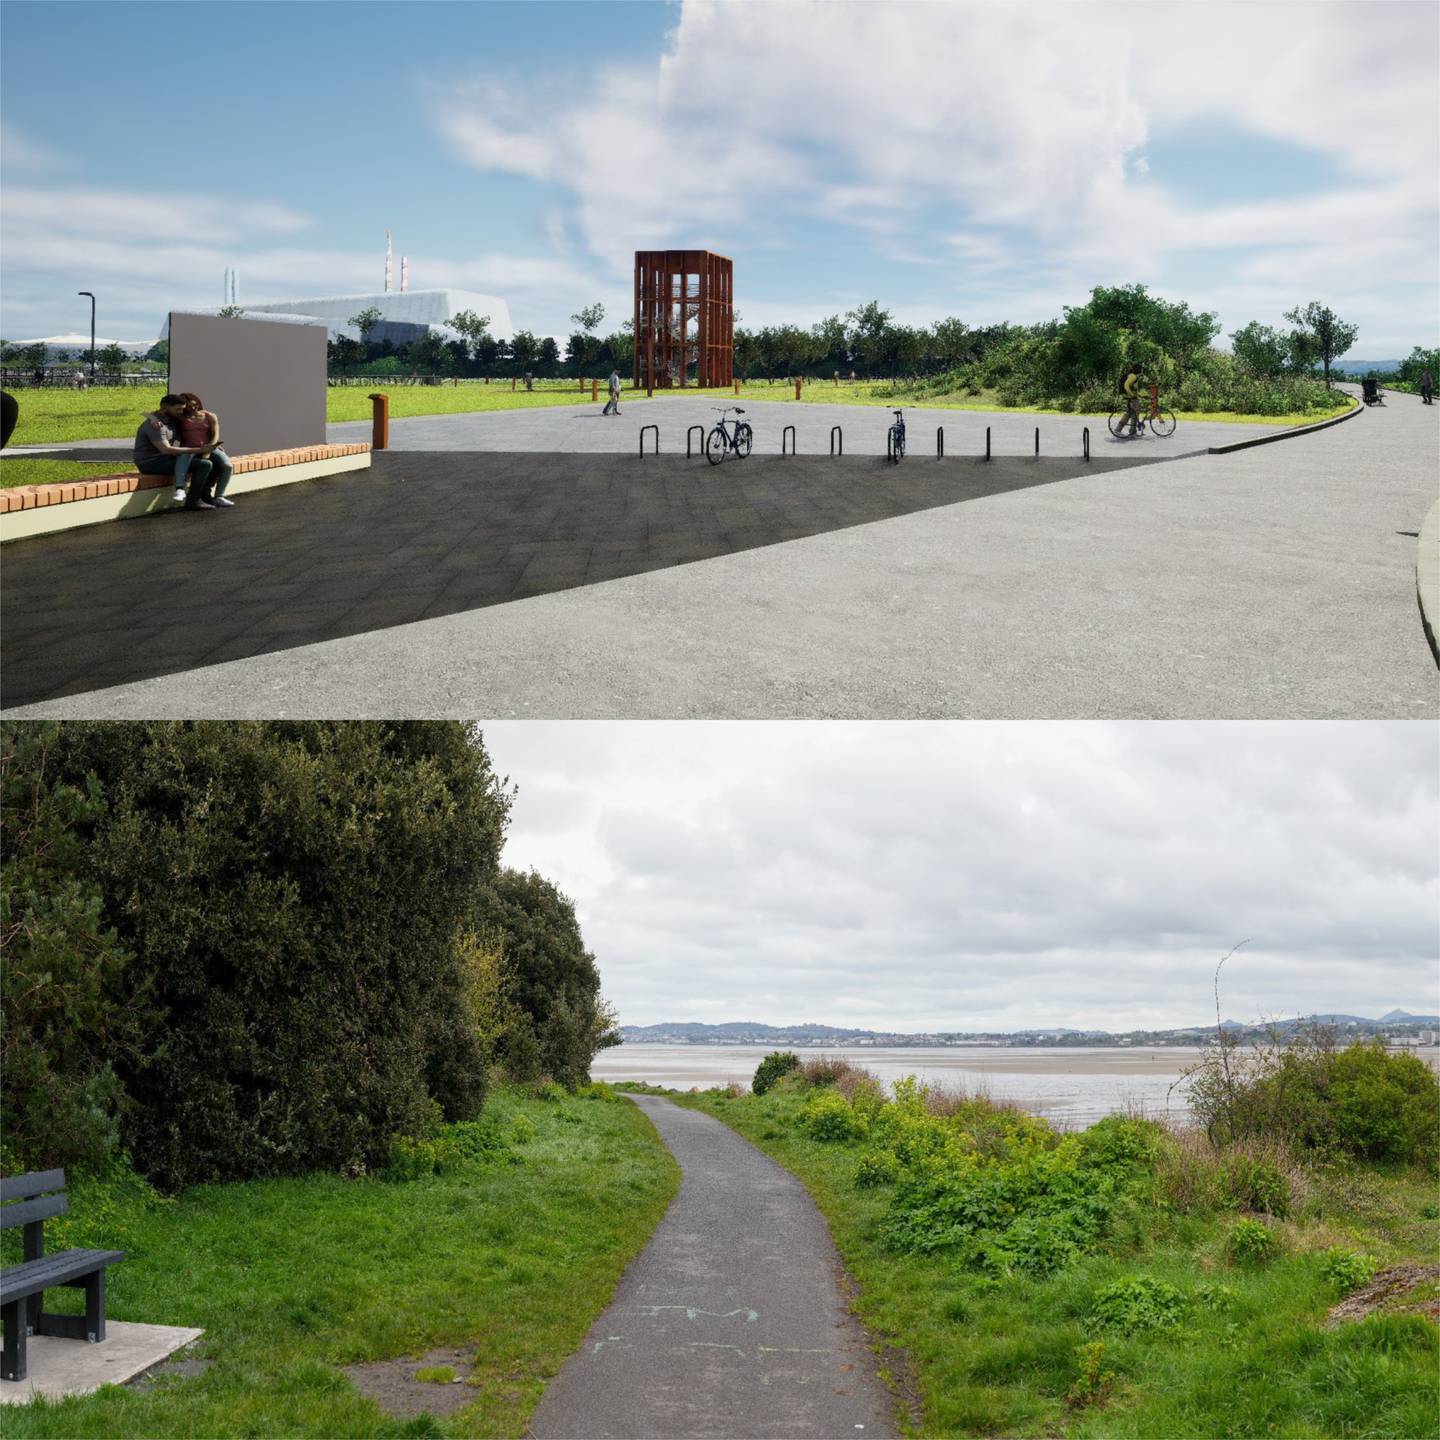 Dublin Port image 6 before and after combo Olivia Kelly story